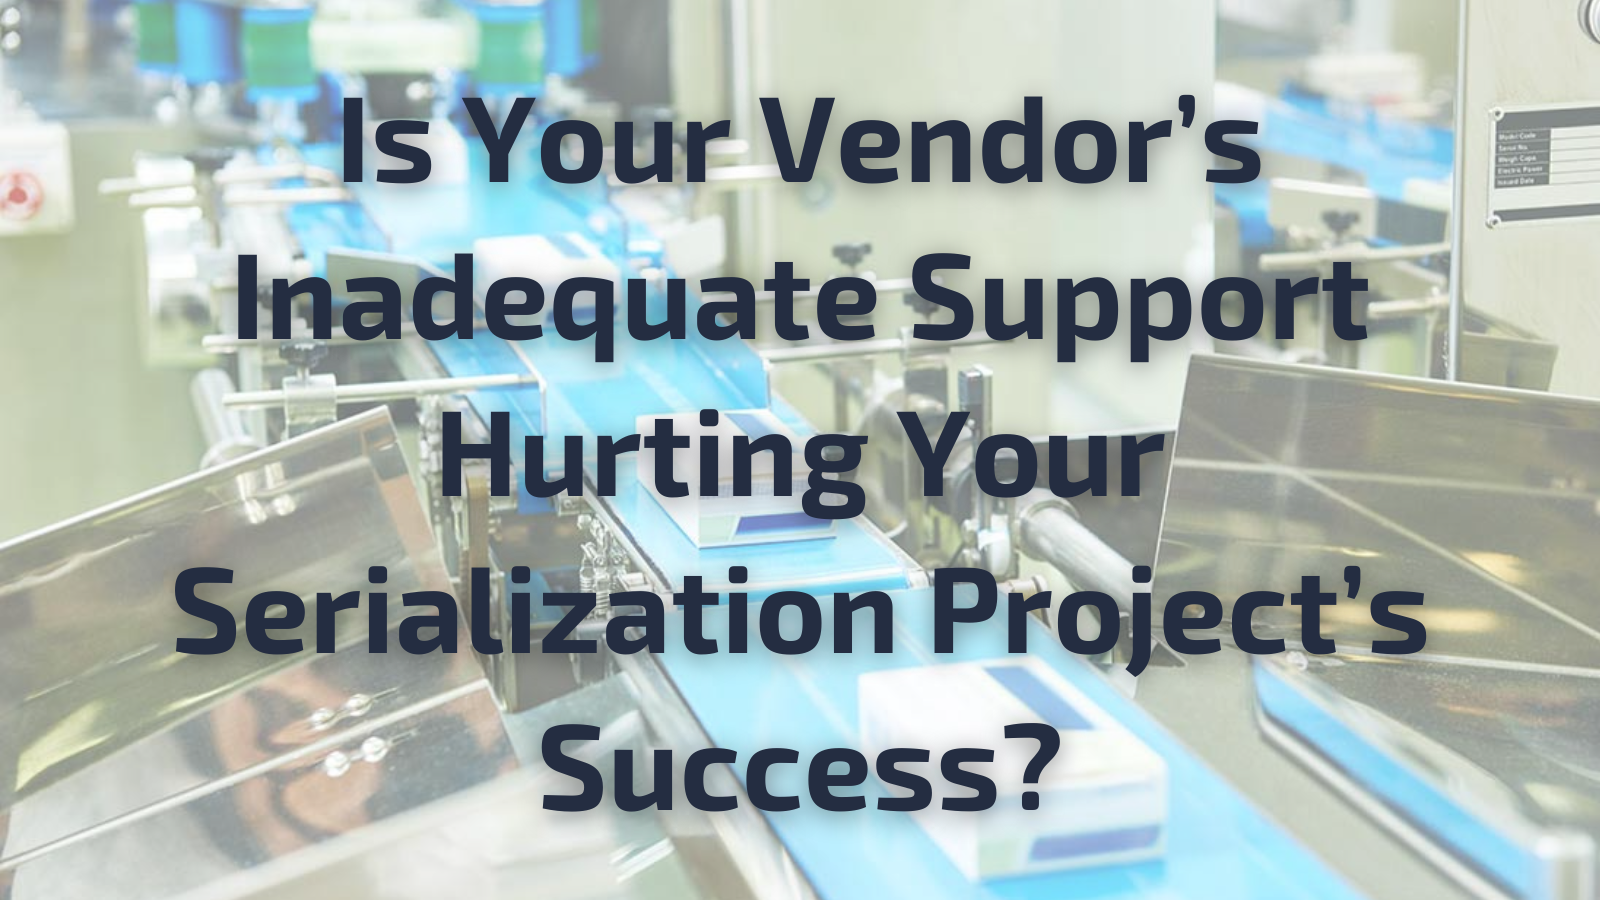 Is Your Vendor’s Inadequate Support Hurting Your Serialization Project